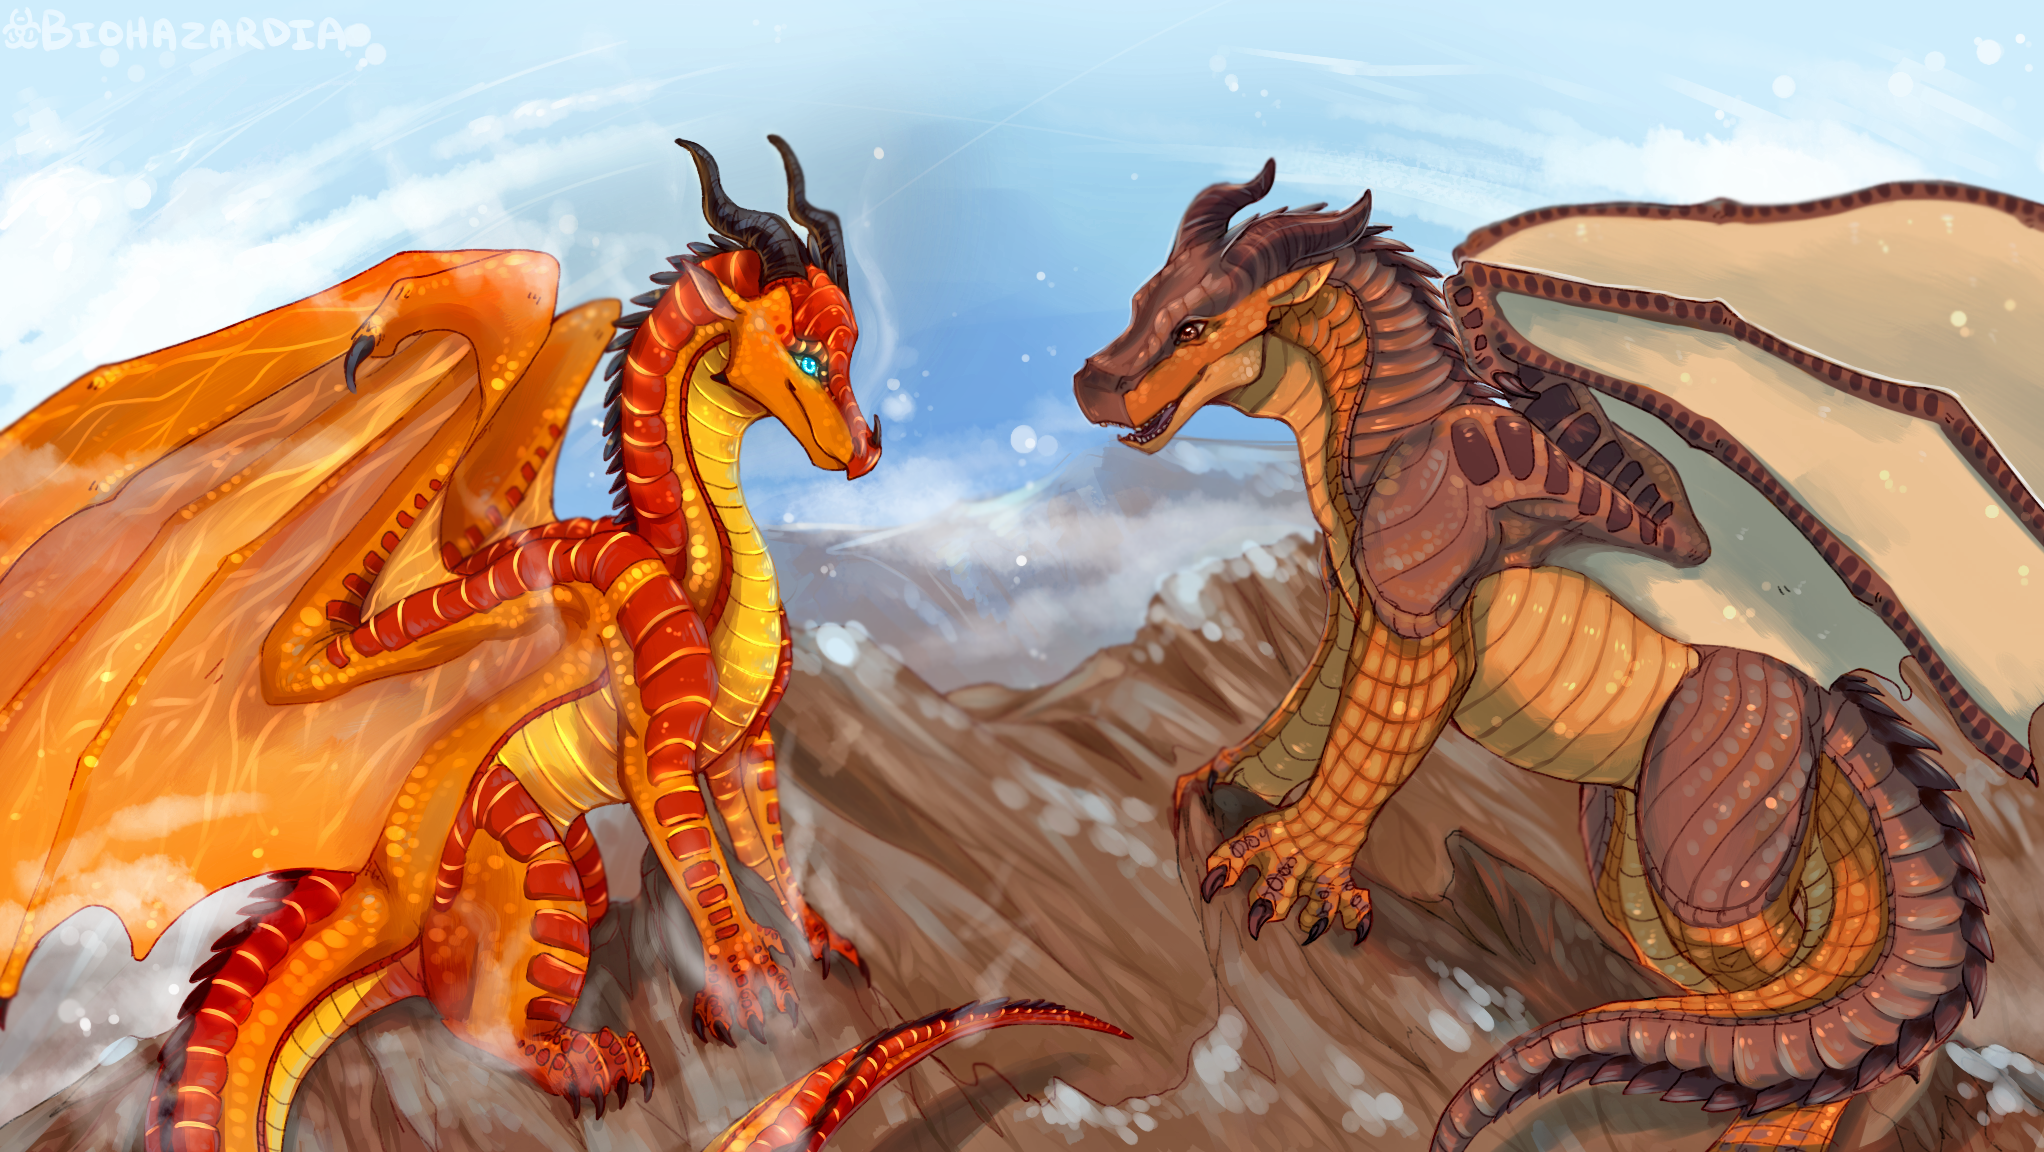 Wings of Fire - Peril and Clay by Biohazardia on DeviantArt